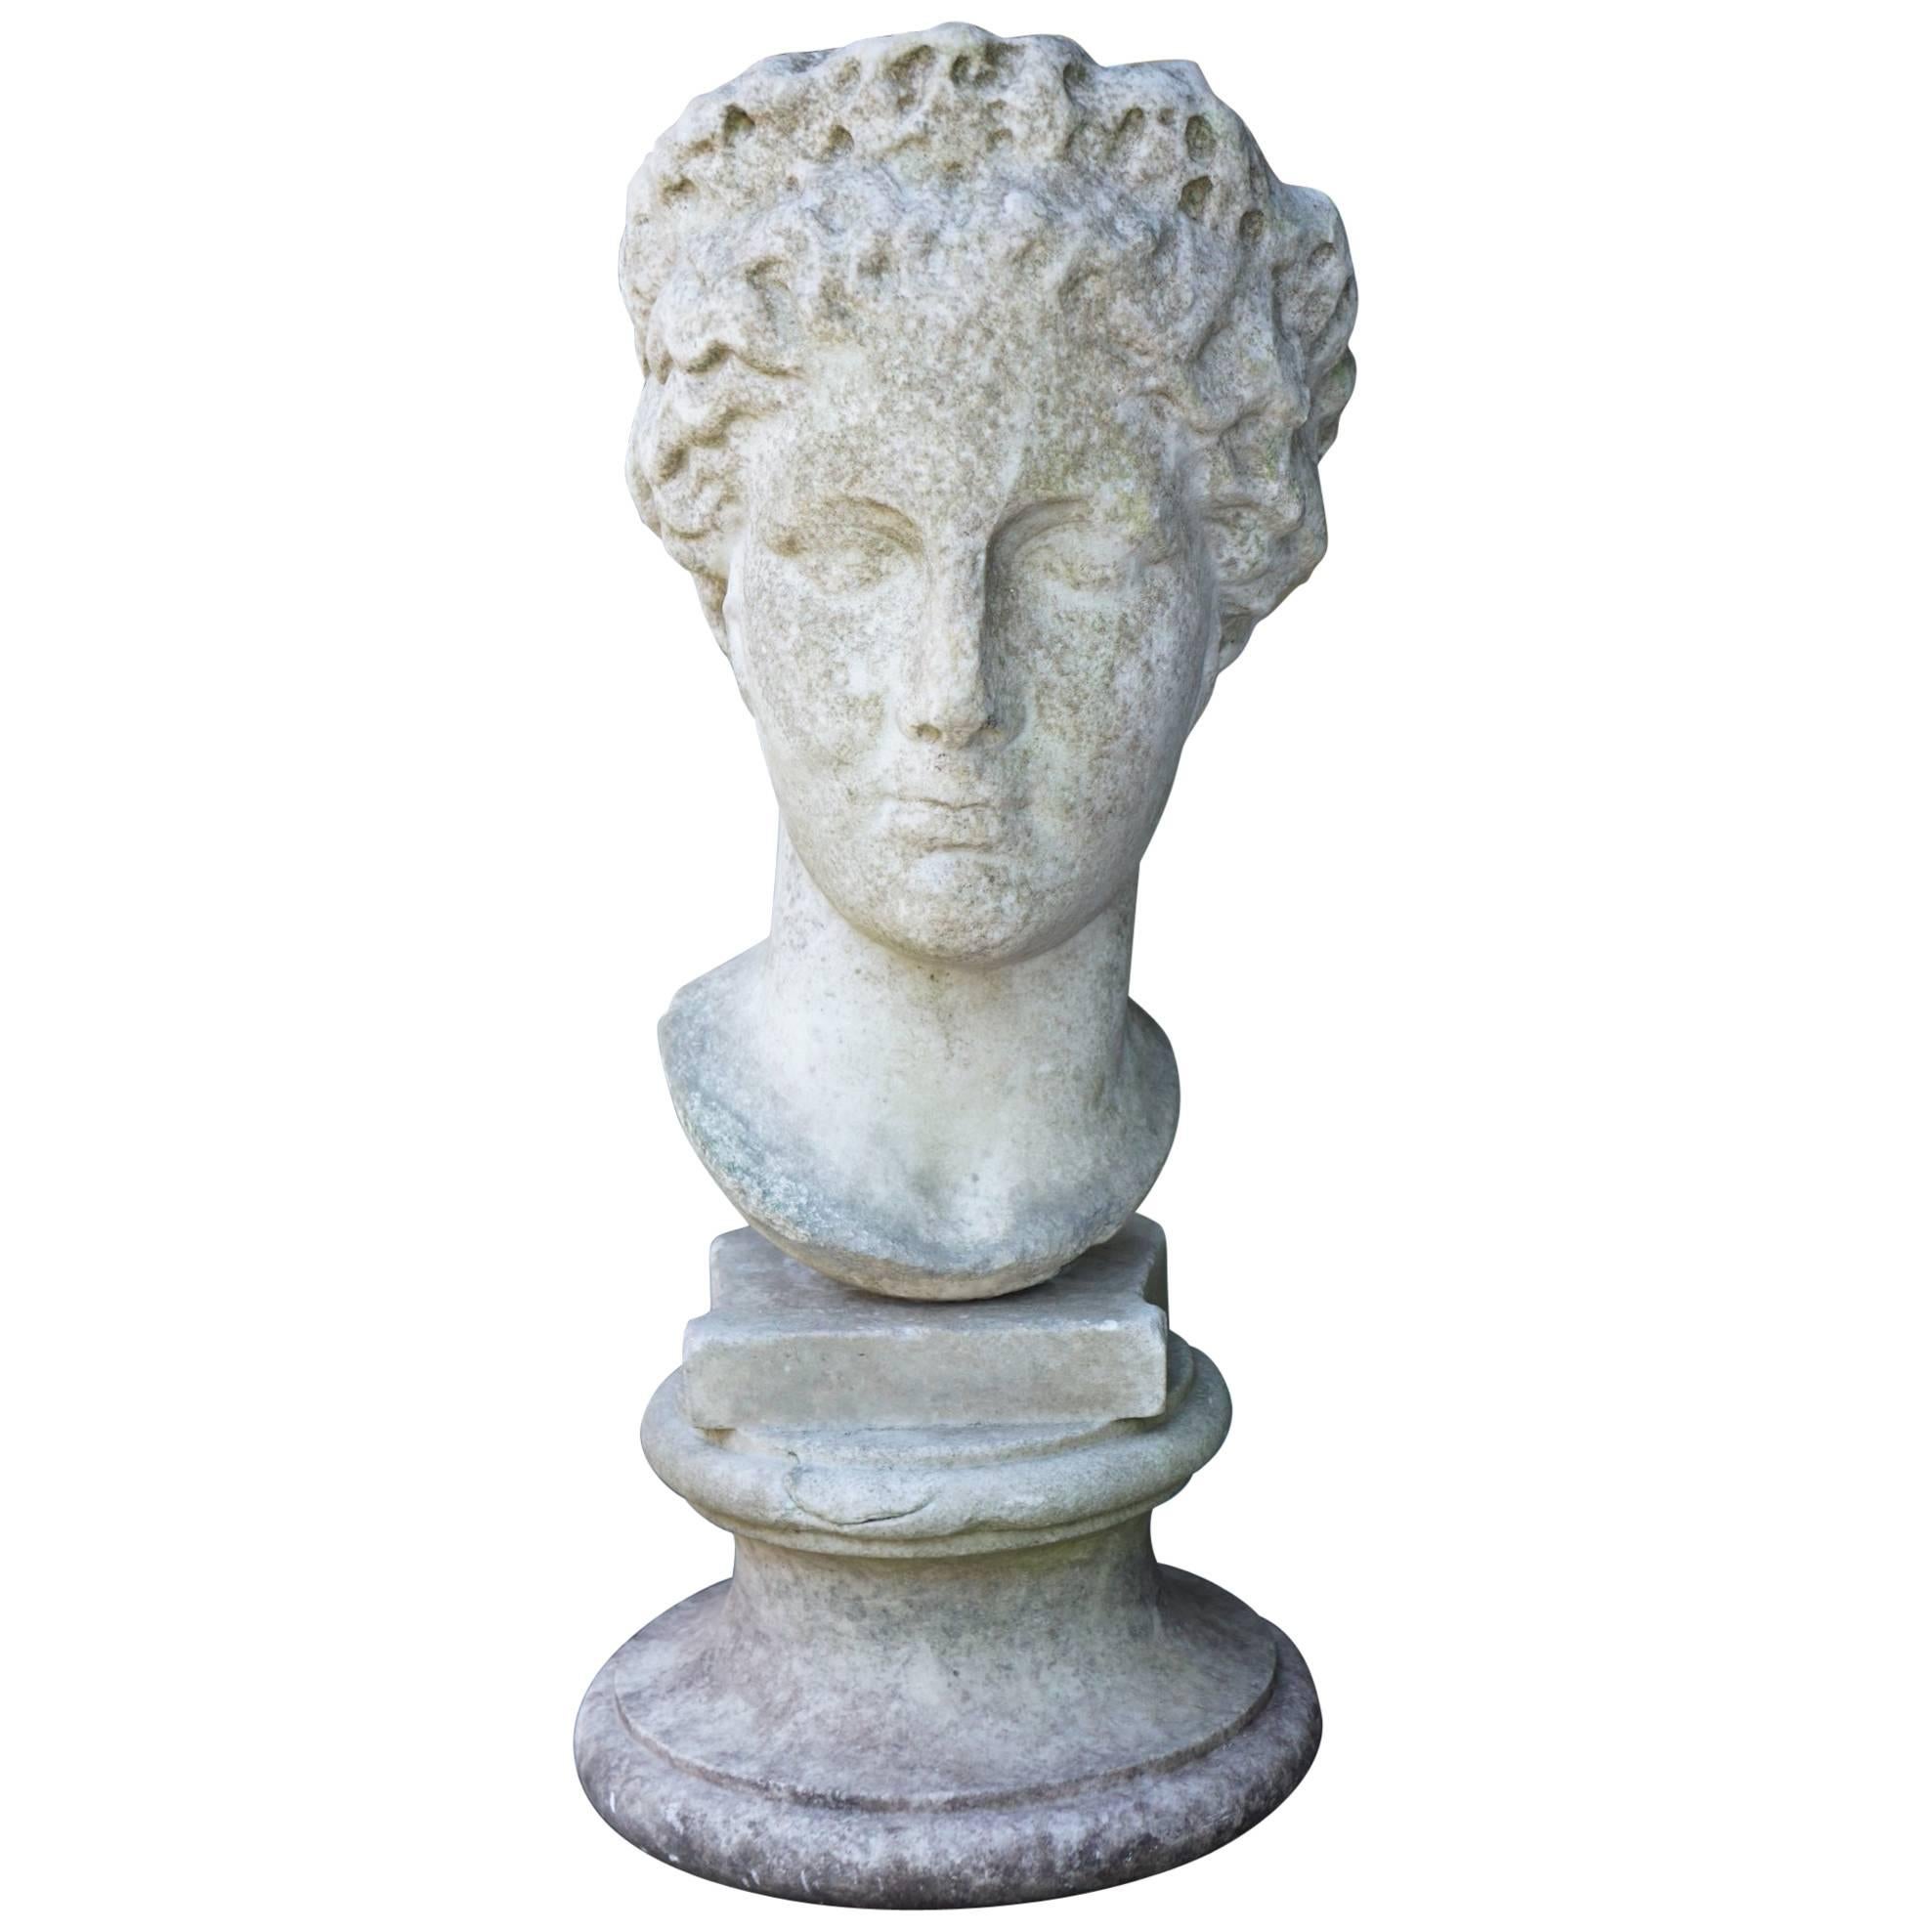 Italian 19th Century Carved Marble Bust after the Antique